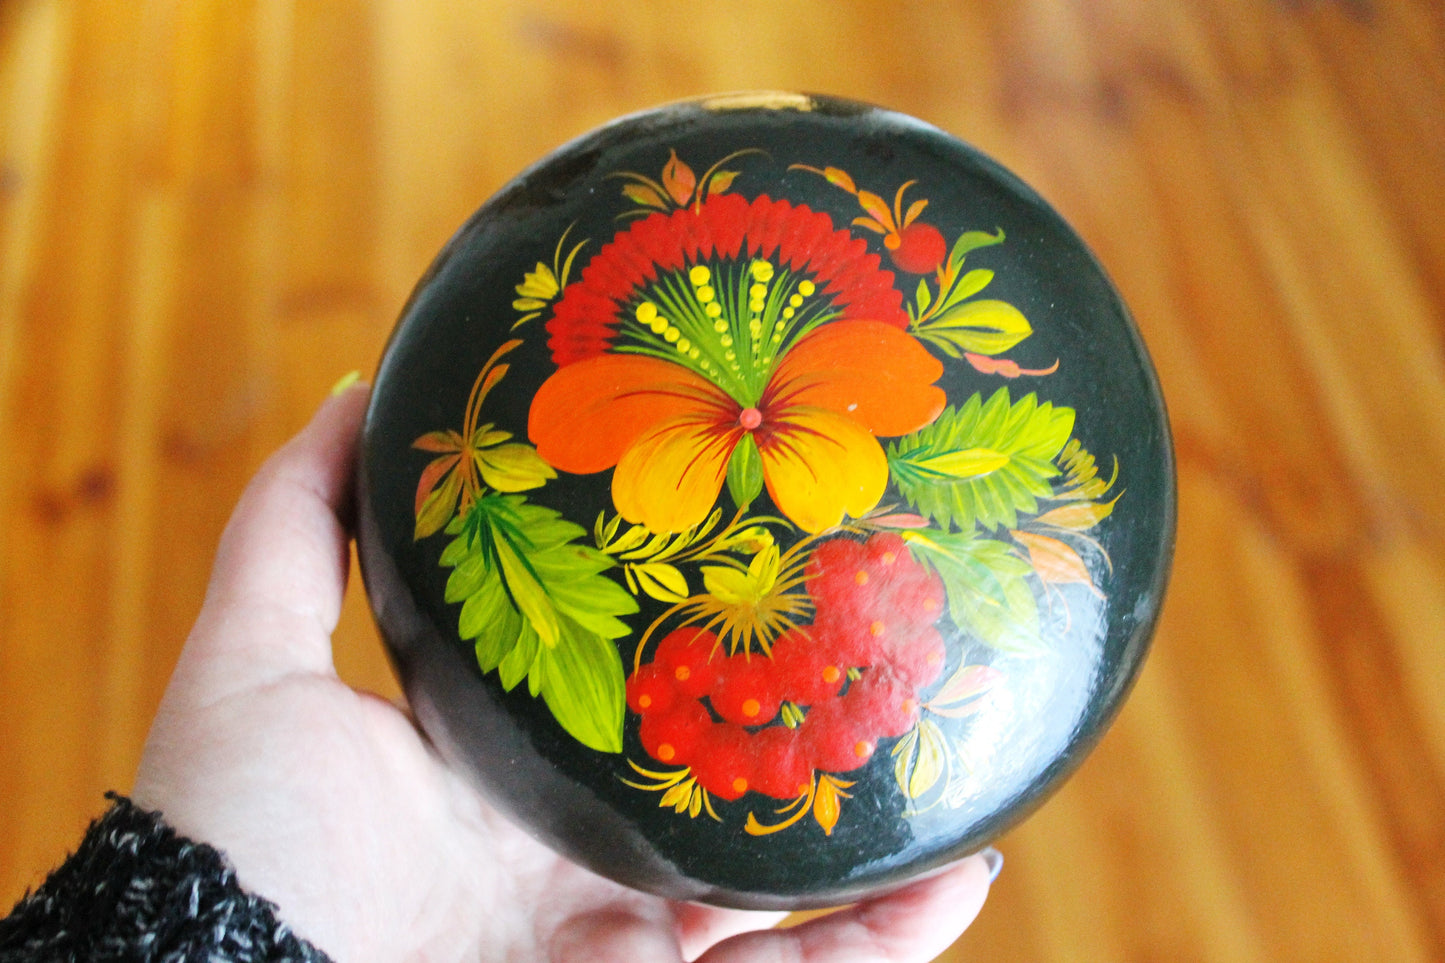 Vintage round  jewelry wooden box 5.2 inches - Petrykivka box - USSR vintage - vintage flower box - handpainted box